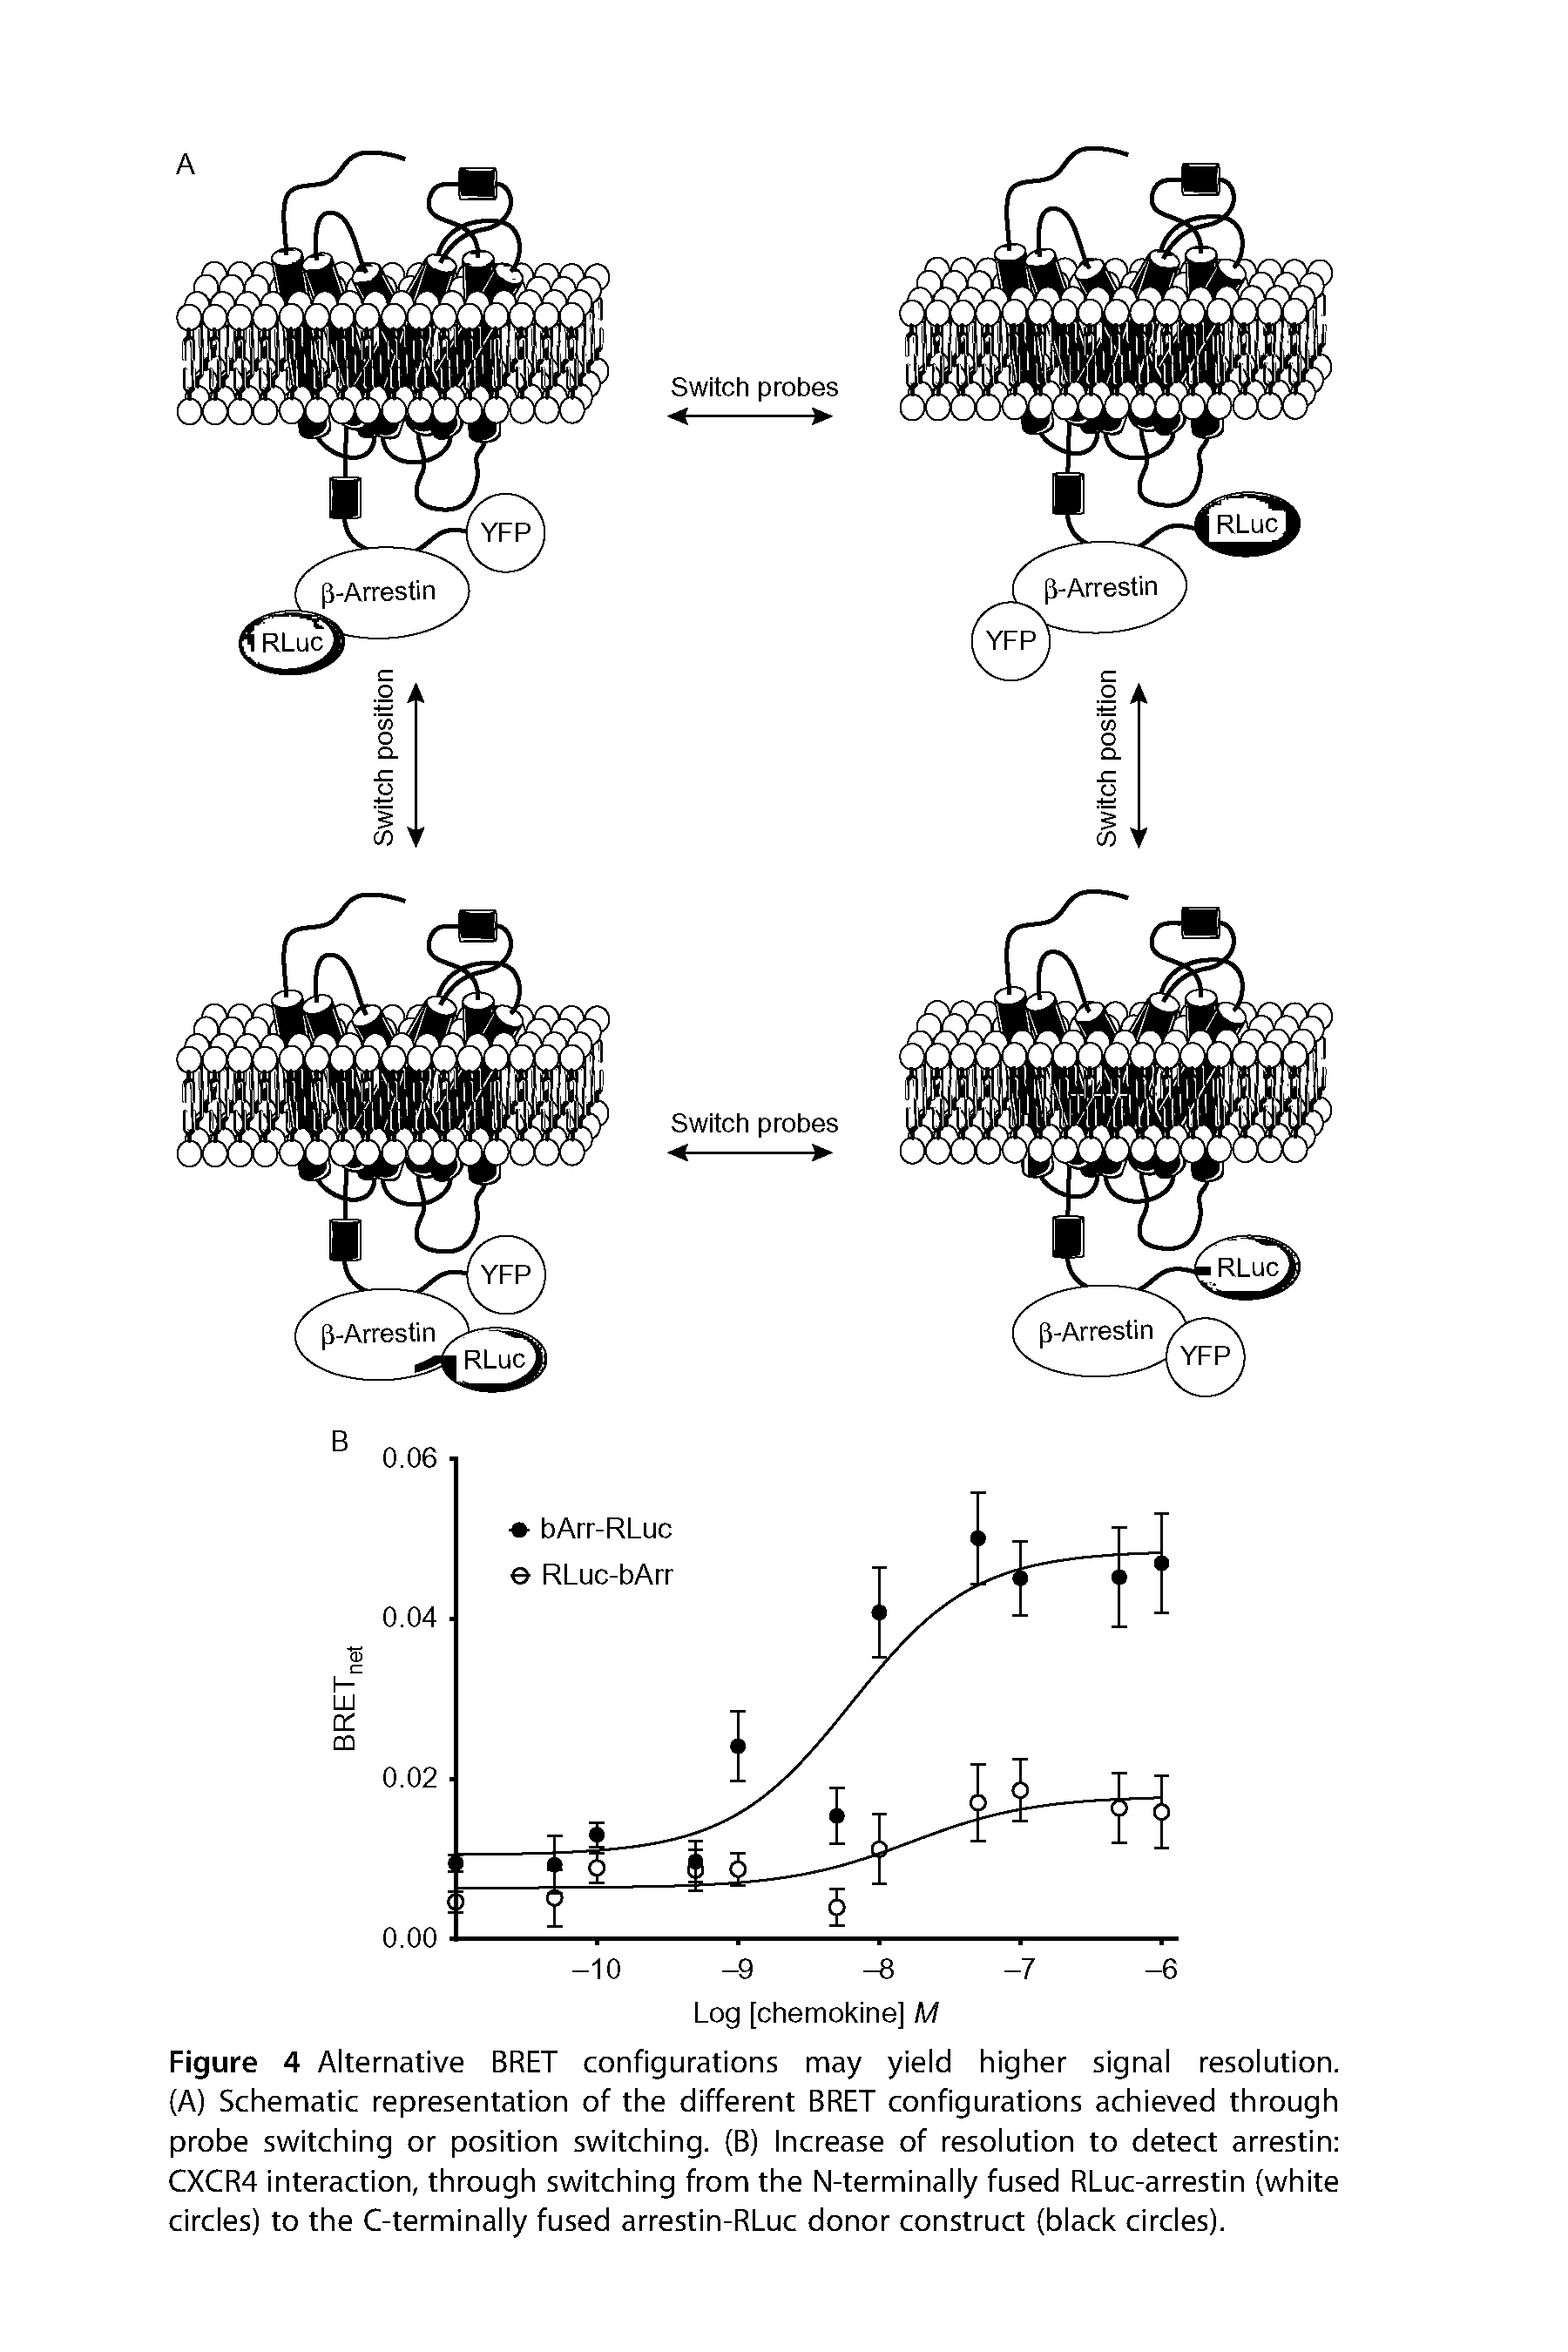 Figure 4 Alternative BRET configurations may yield higher signal resolution. (A) Schematic representation of the different BRET configurations achieved through probe switching or position switching. (B) Increase of resolution to detect arrestin CXCR4 interaction, through switching from the N-terminally fused RLuc-arrestin (white circles) to the C-terminally fused arrestin-RLuc donor construct (black circles).